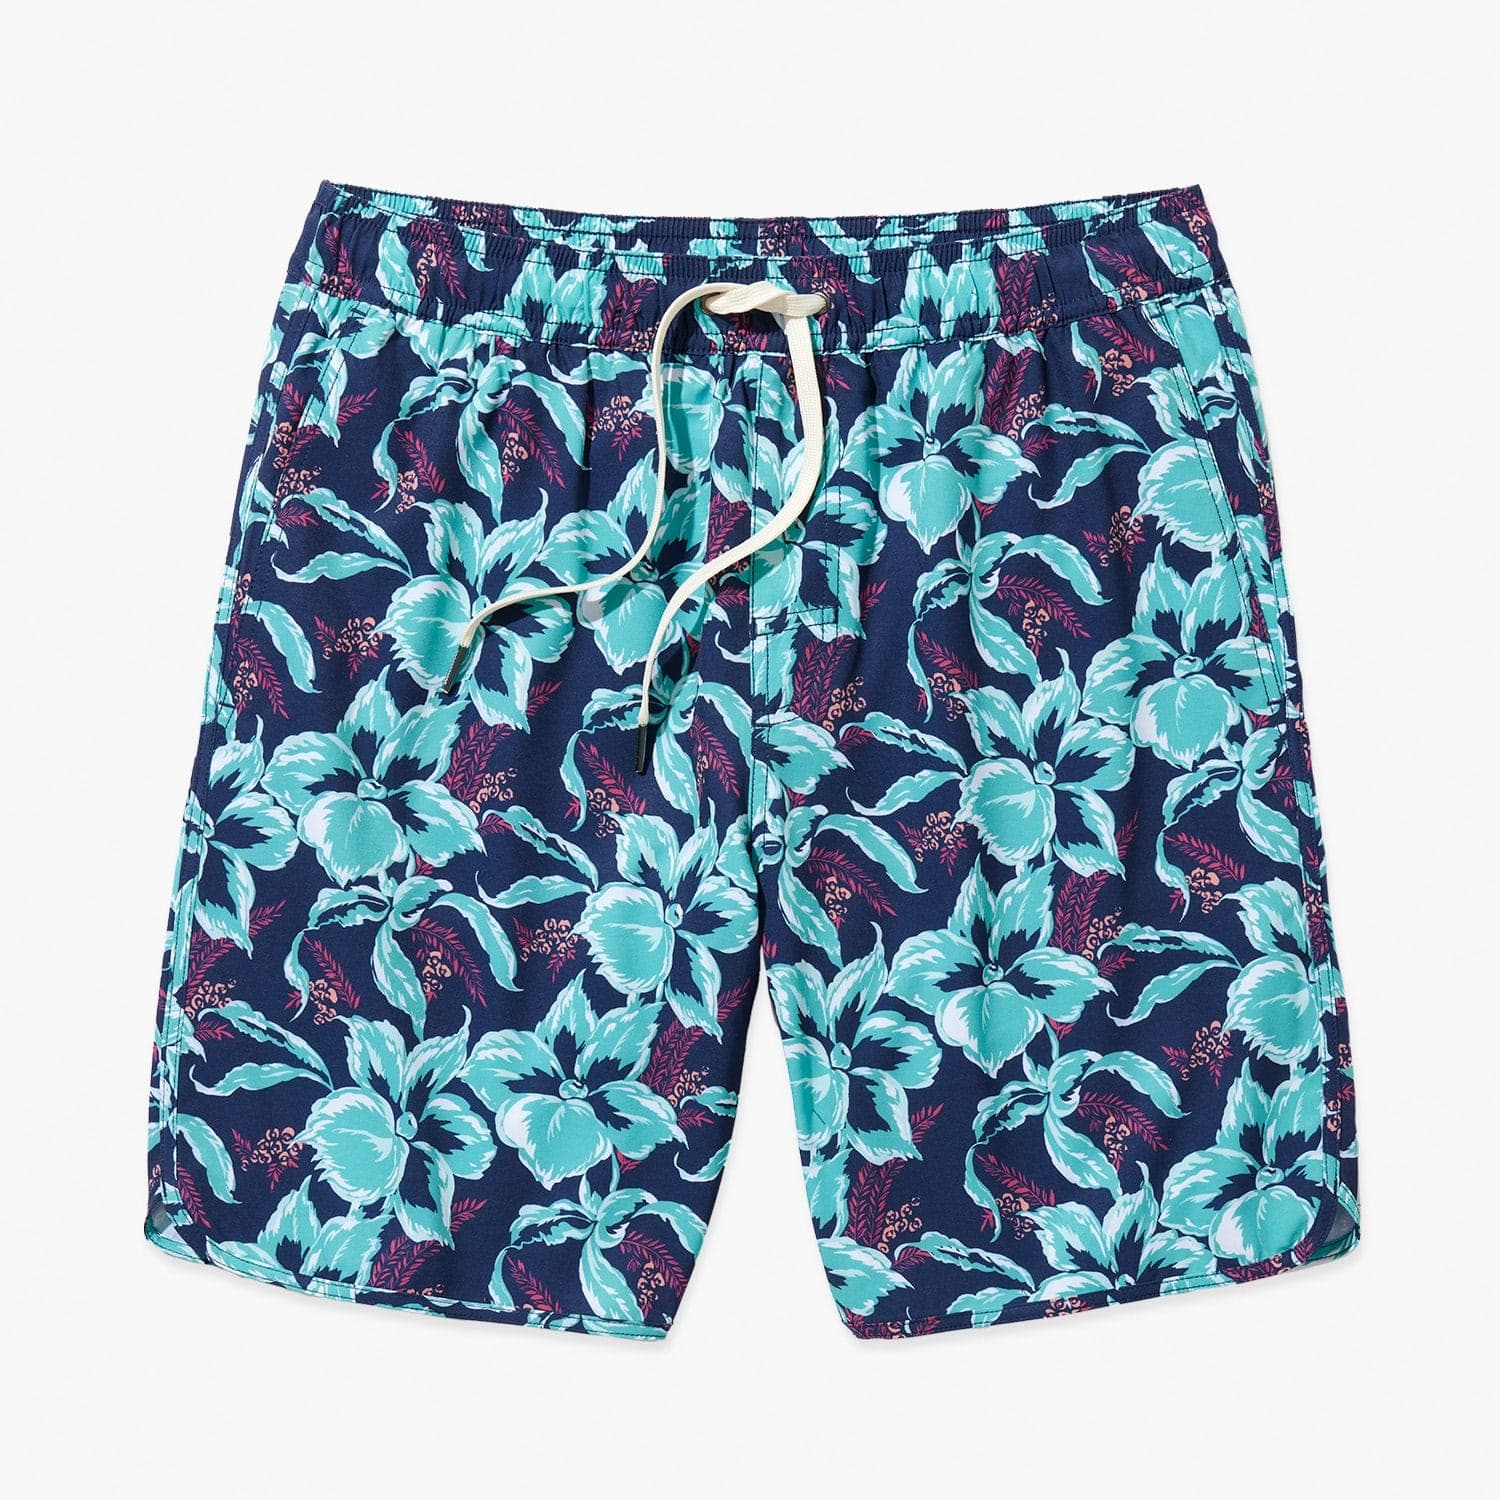 The Anchor Short, Swim Suit With Liners